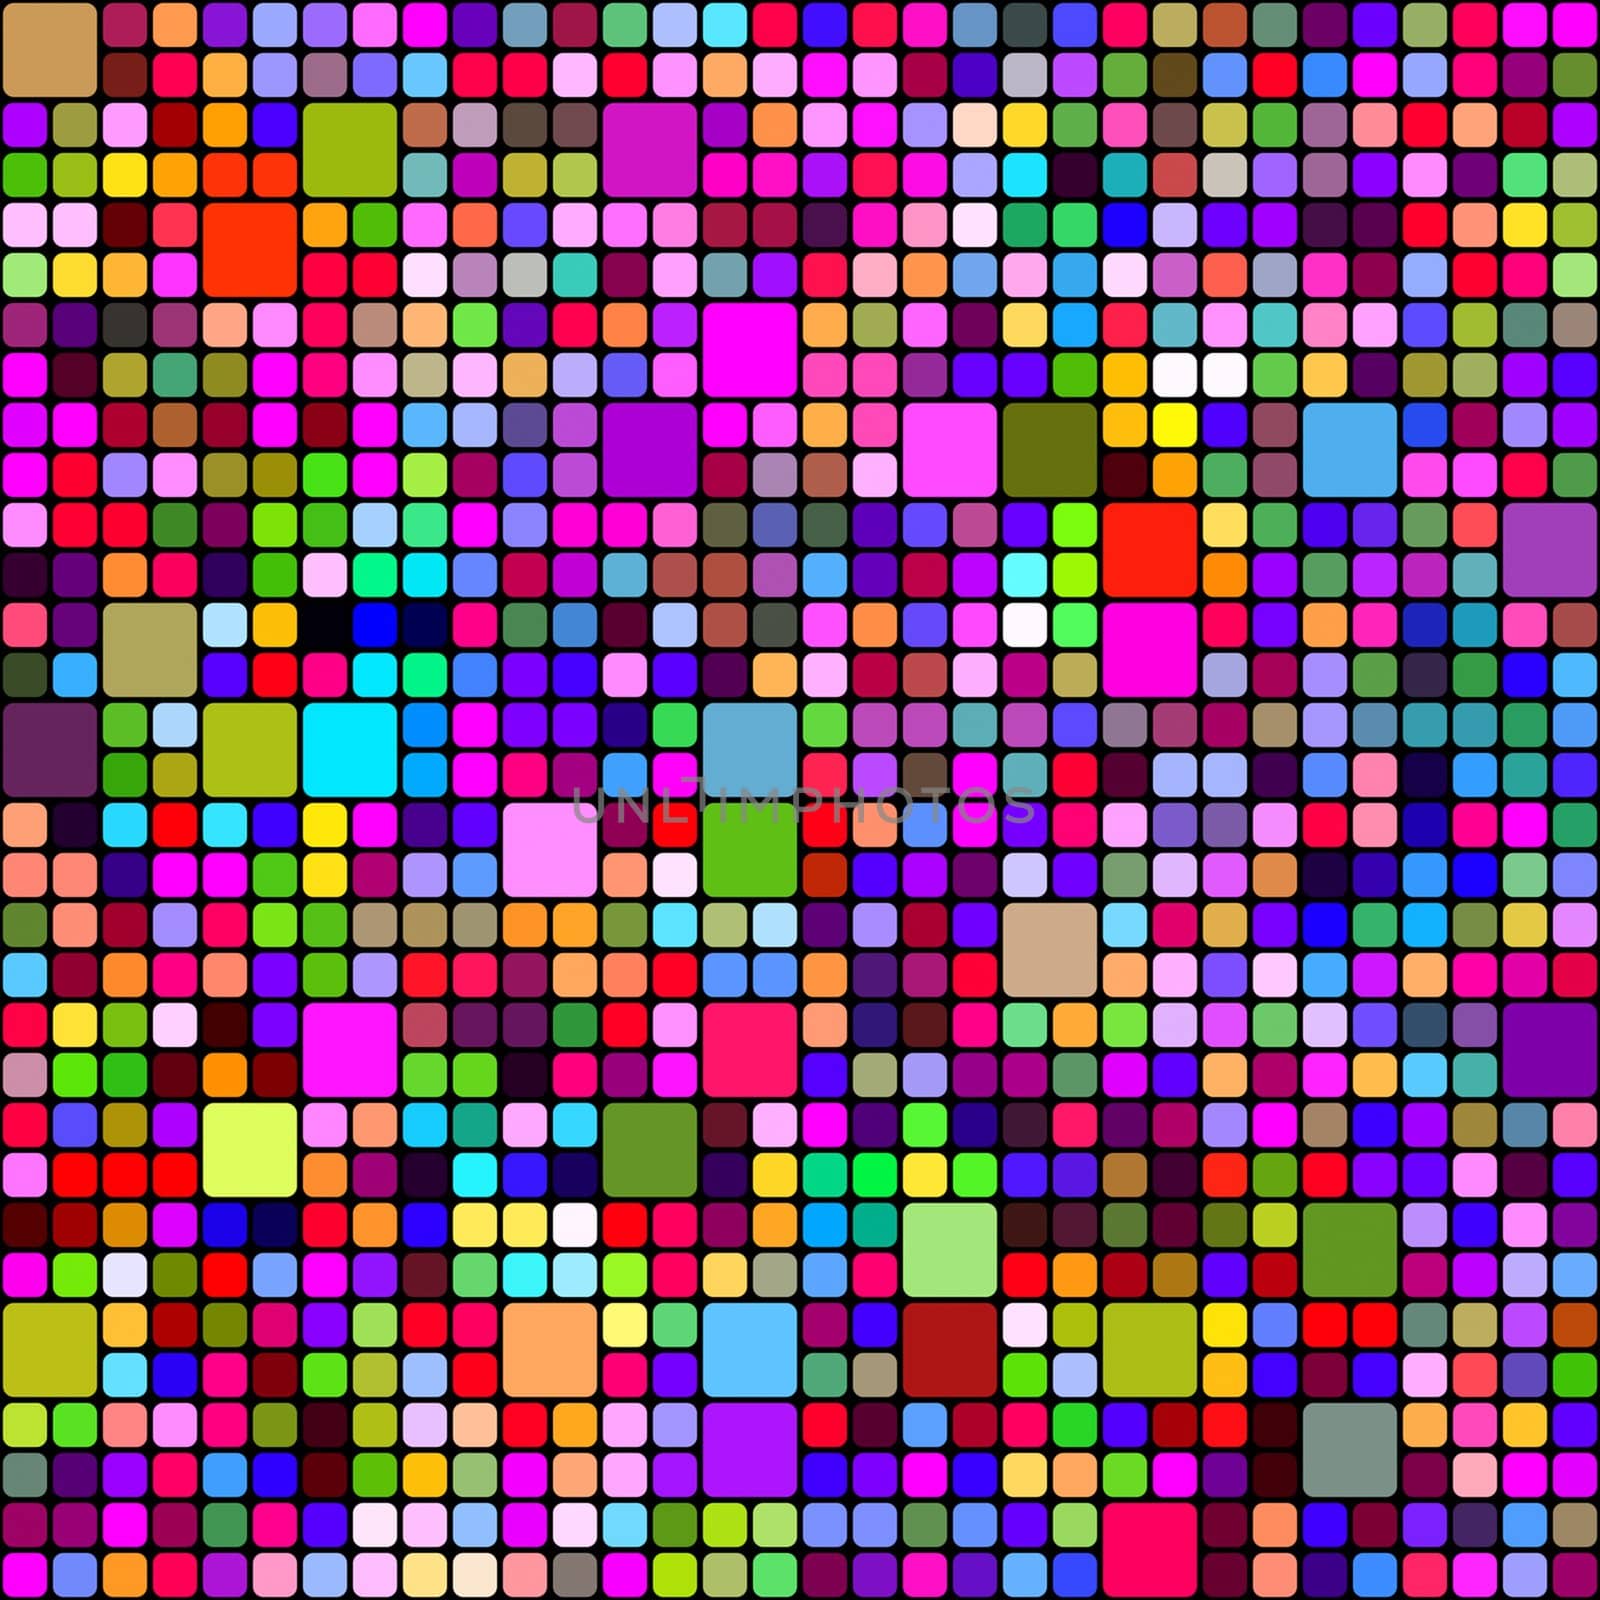 seamless texture of bright random colored shapes